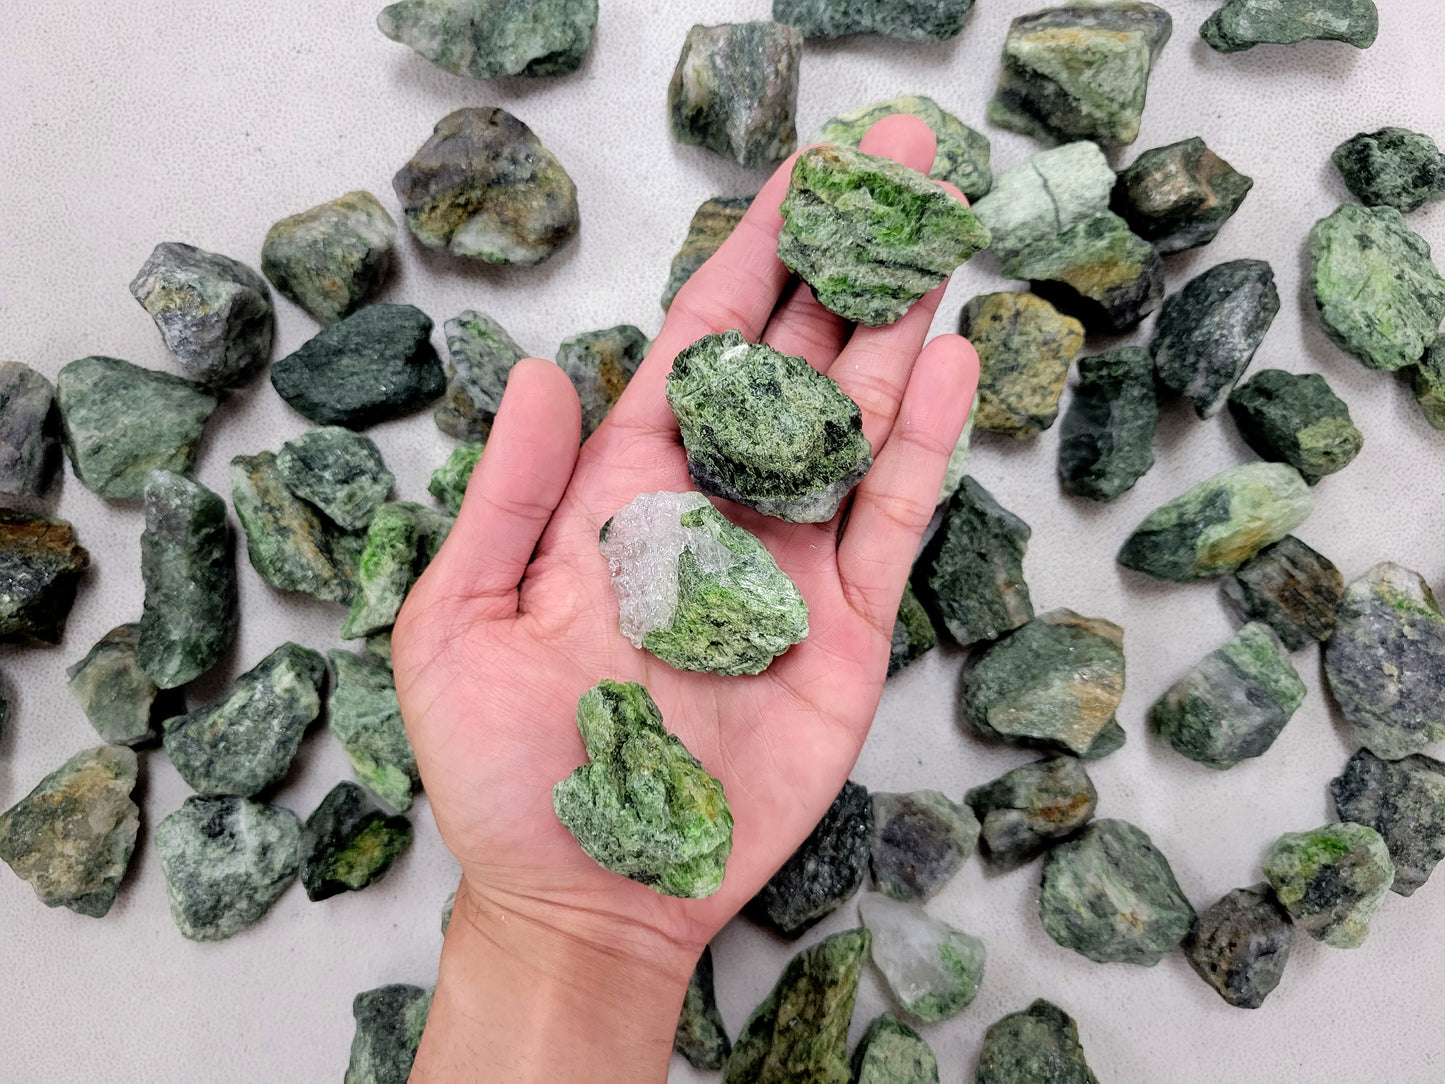 Rough Diopside Crystal Stones from Brazil - Bulk Raw Crystals